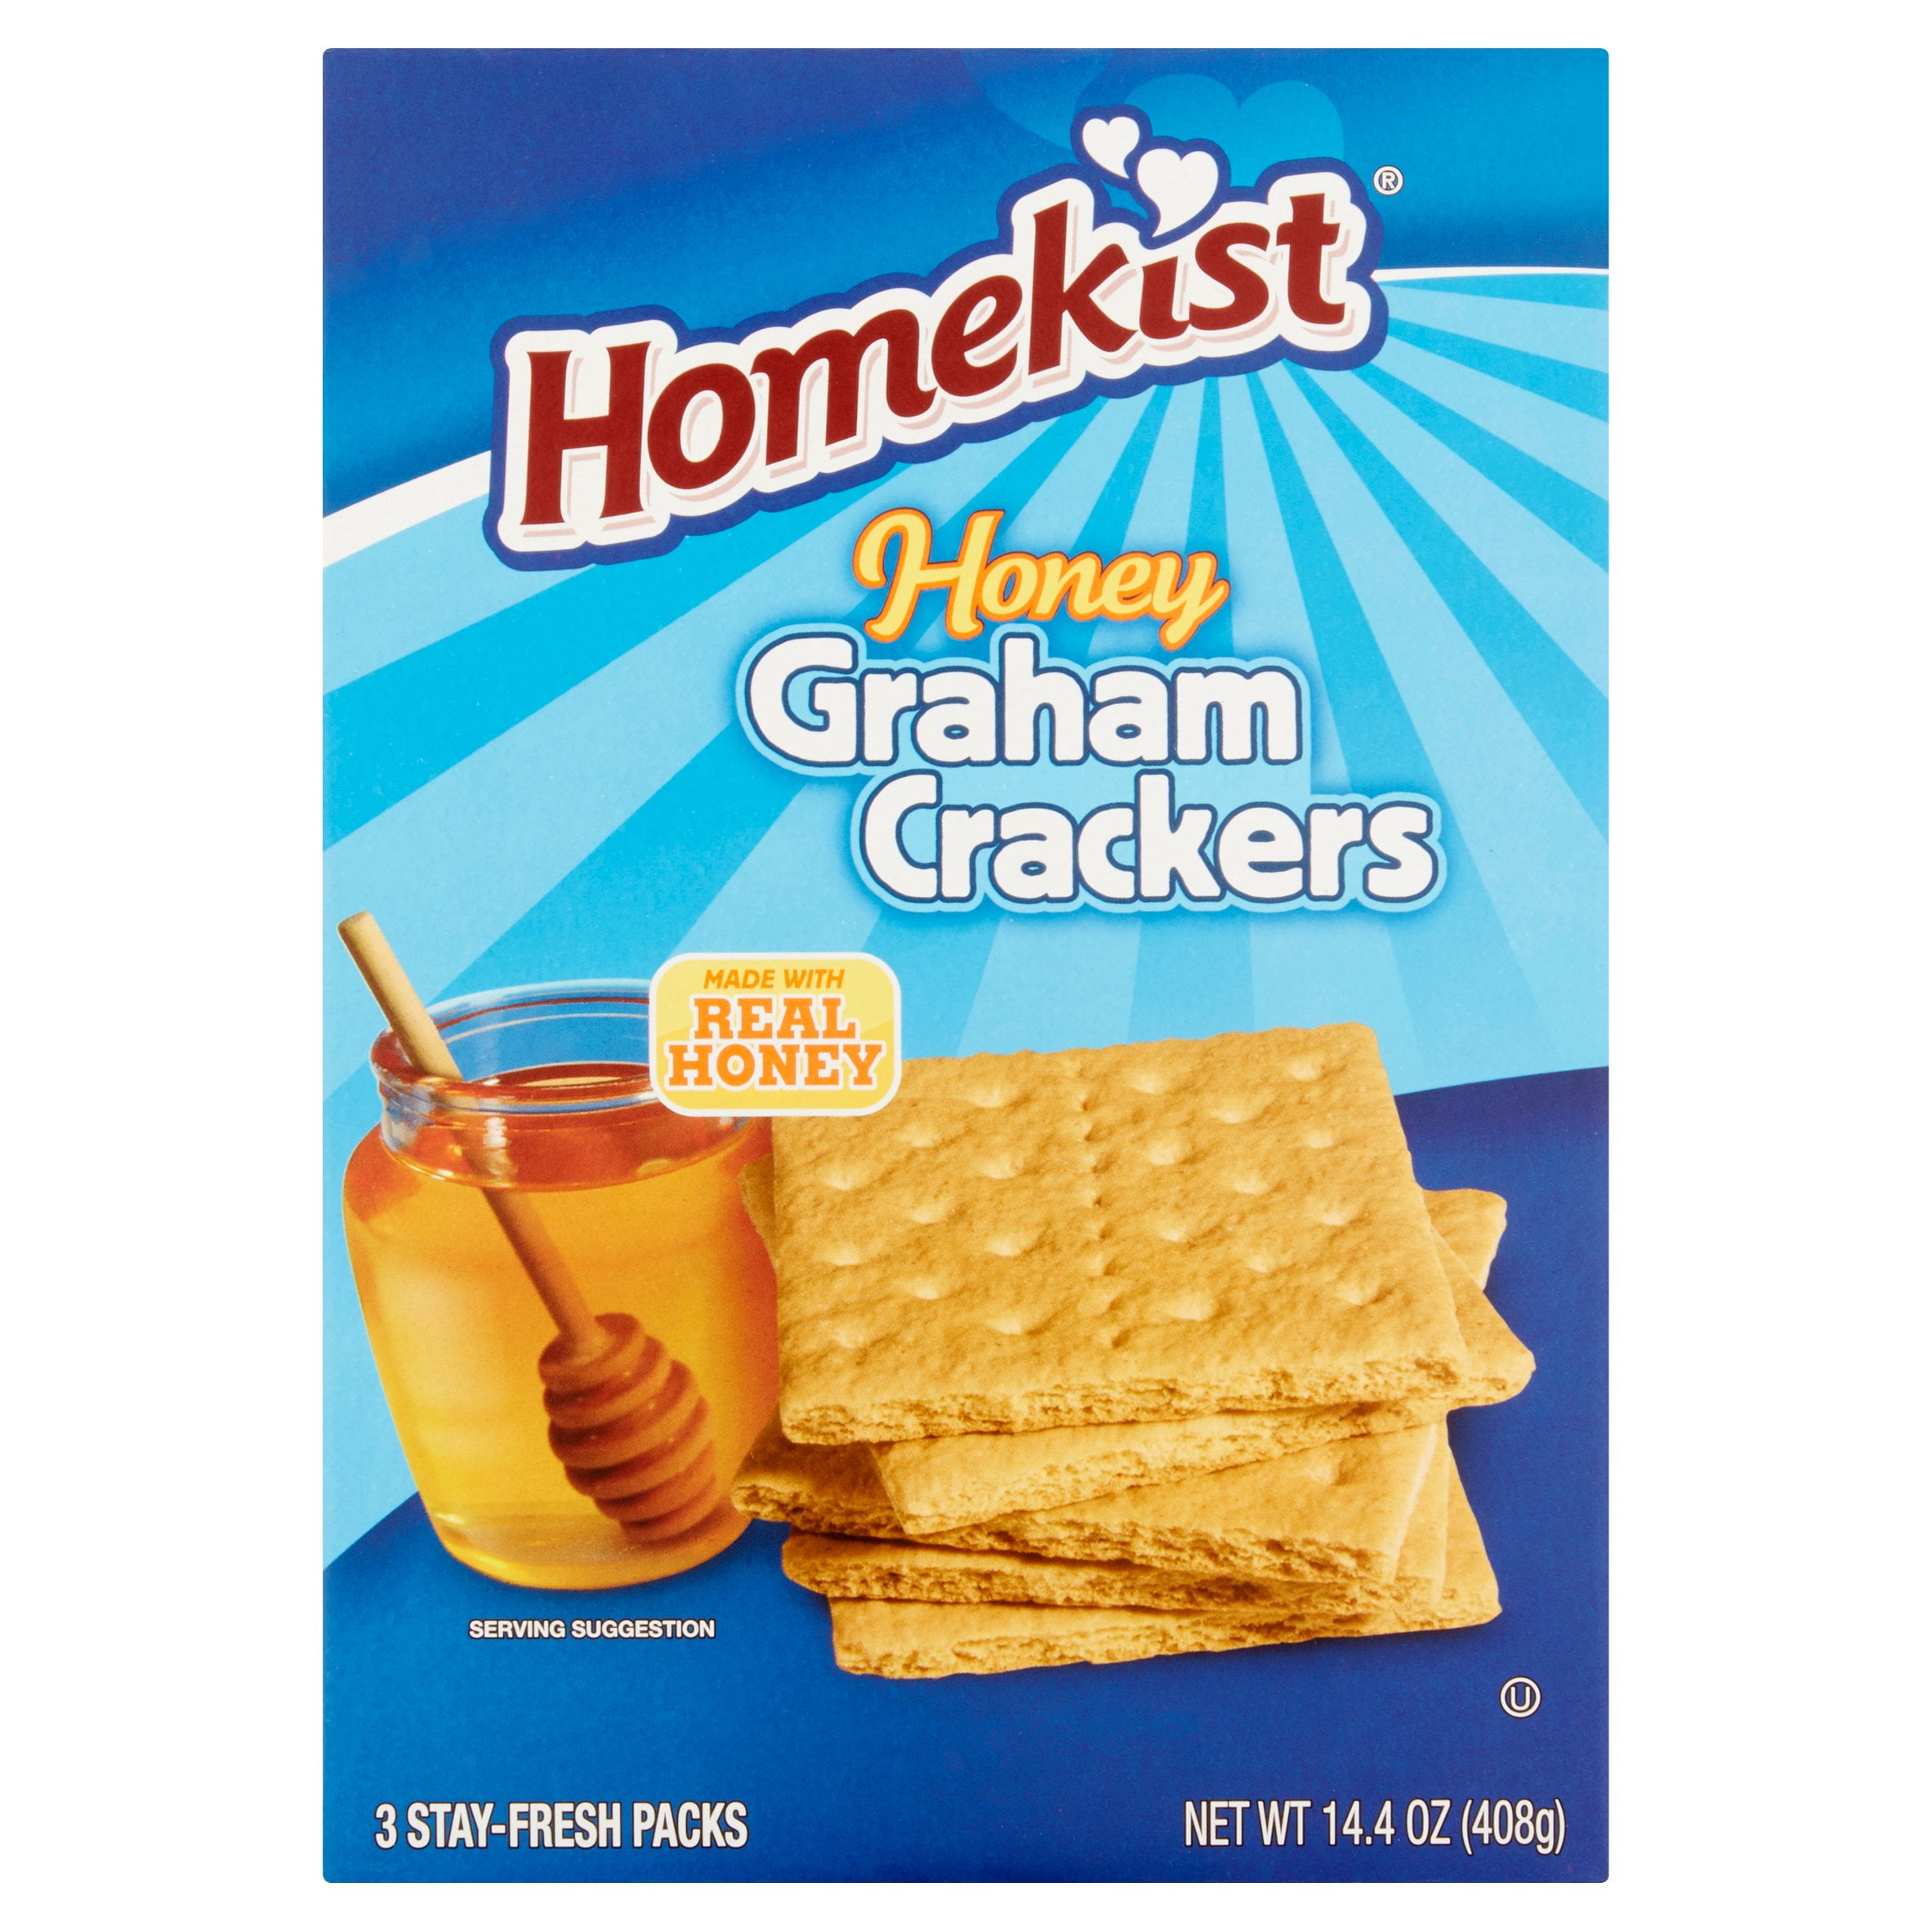 are graham crackers bad for dogs